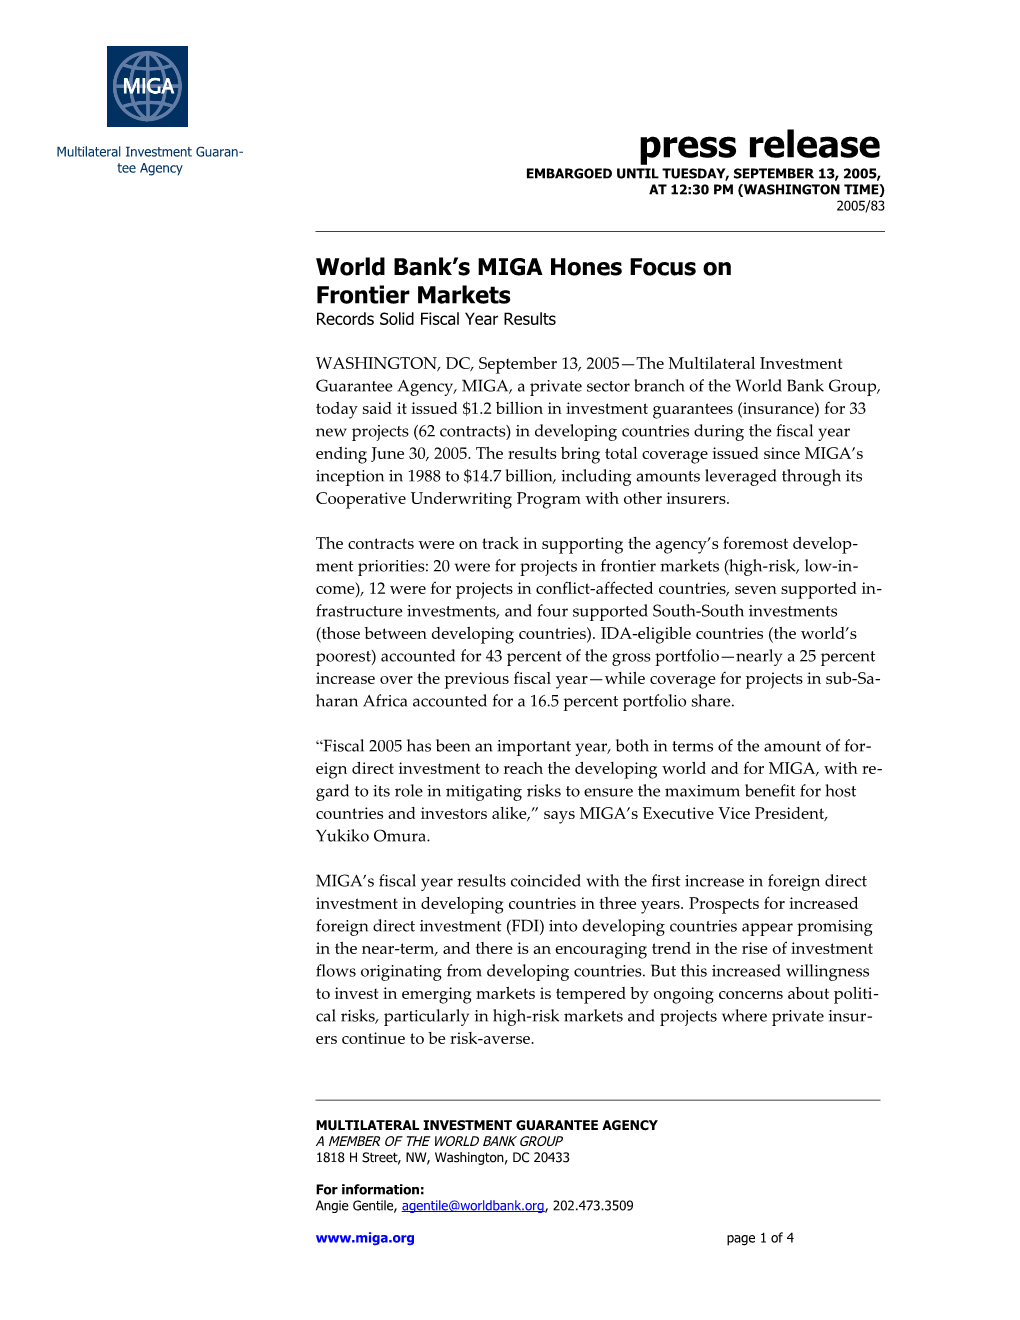 World Bank S MIGA Hones Focus on Frontier Marketsrecords Solid Fiscal Year Results